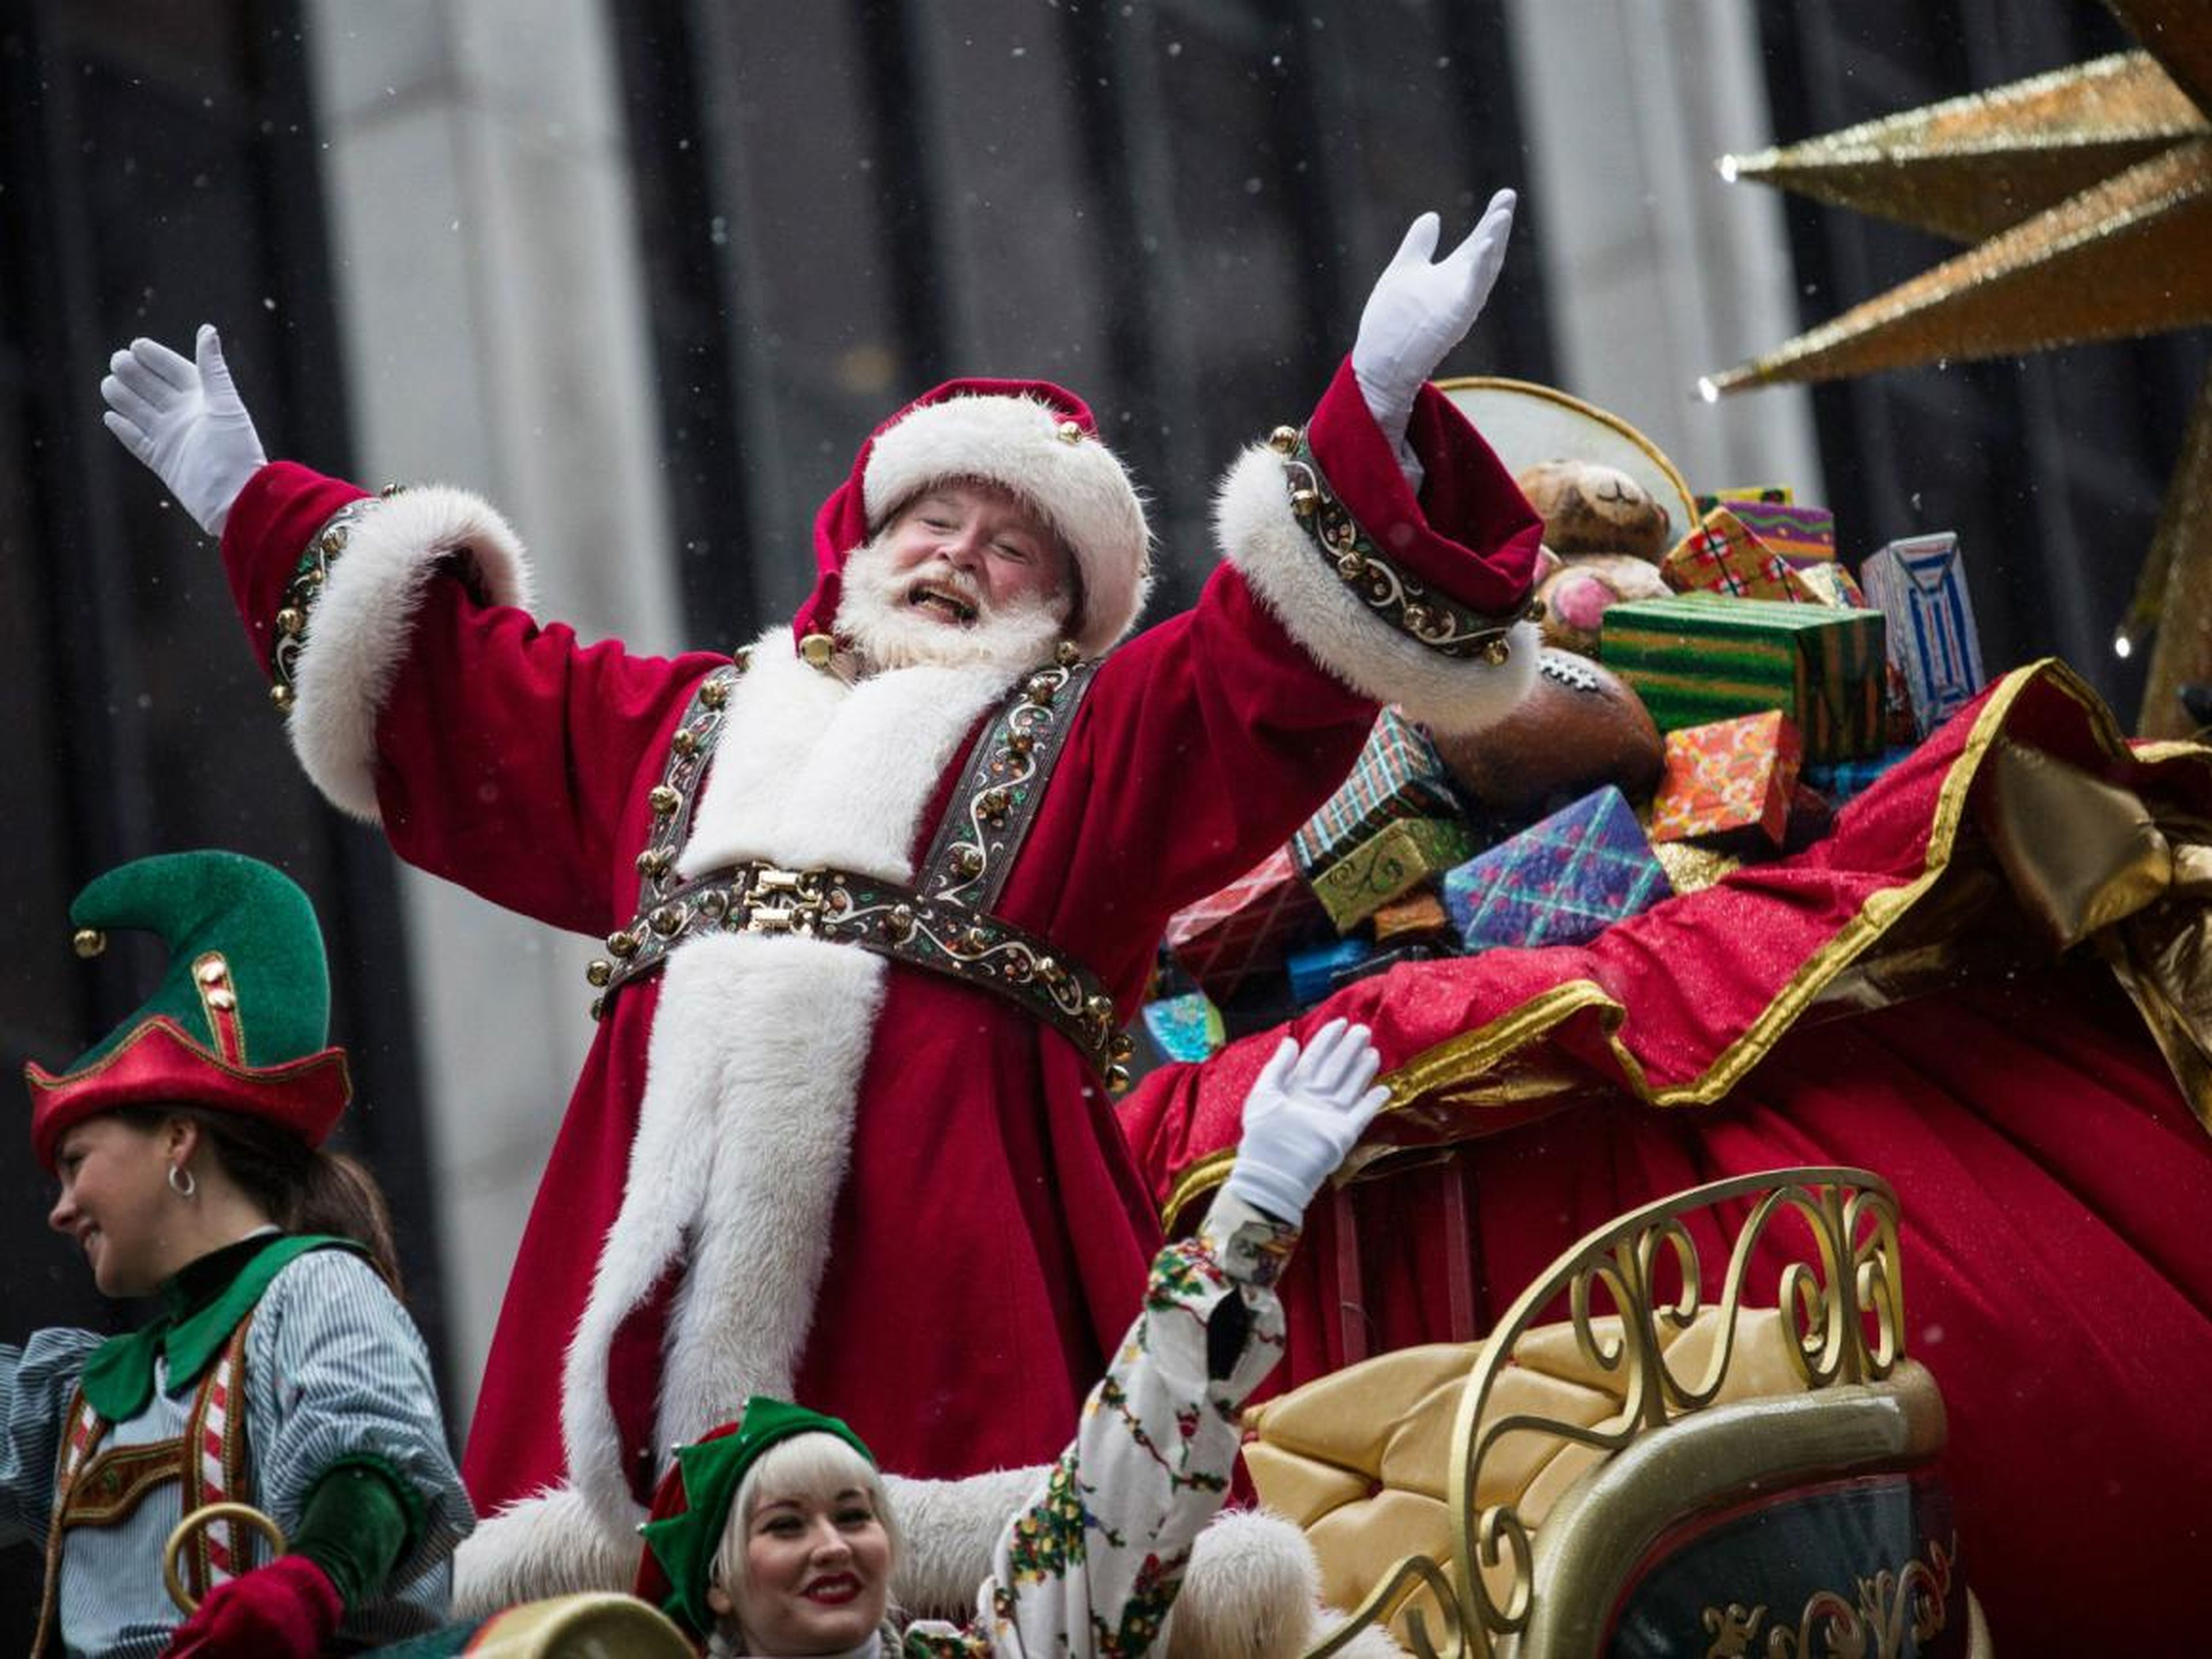 Santa Claus at the end of the Macy's Thanksgiving Day parade.